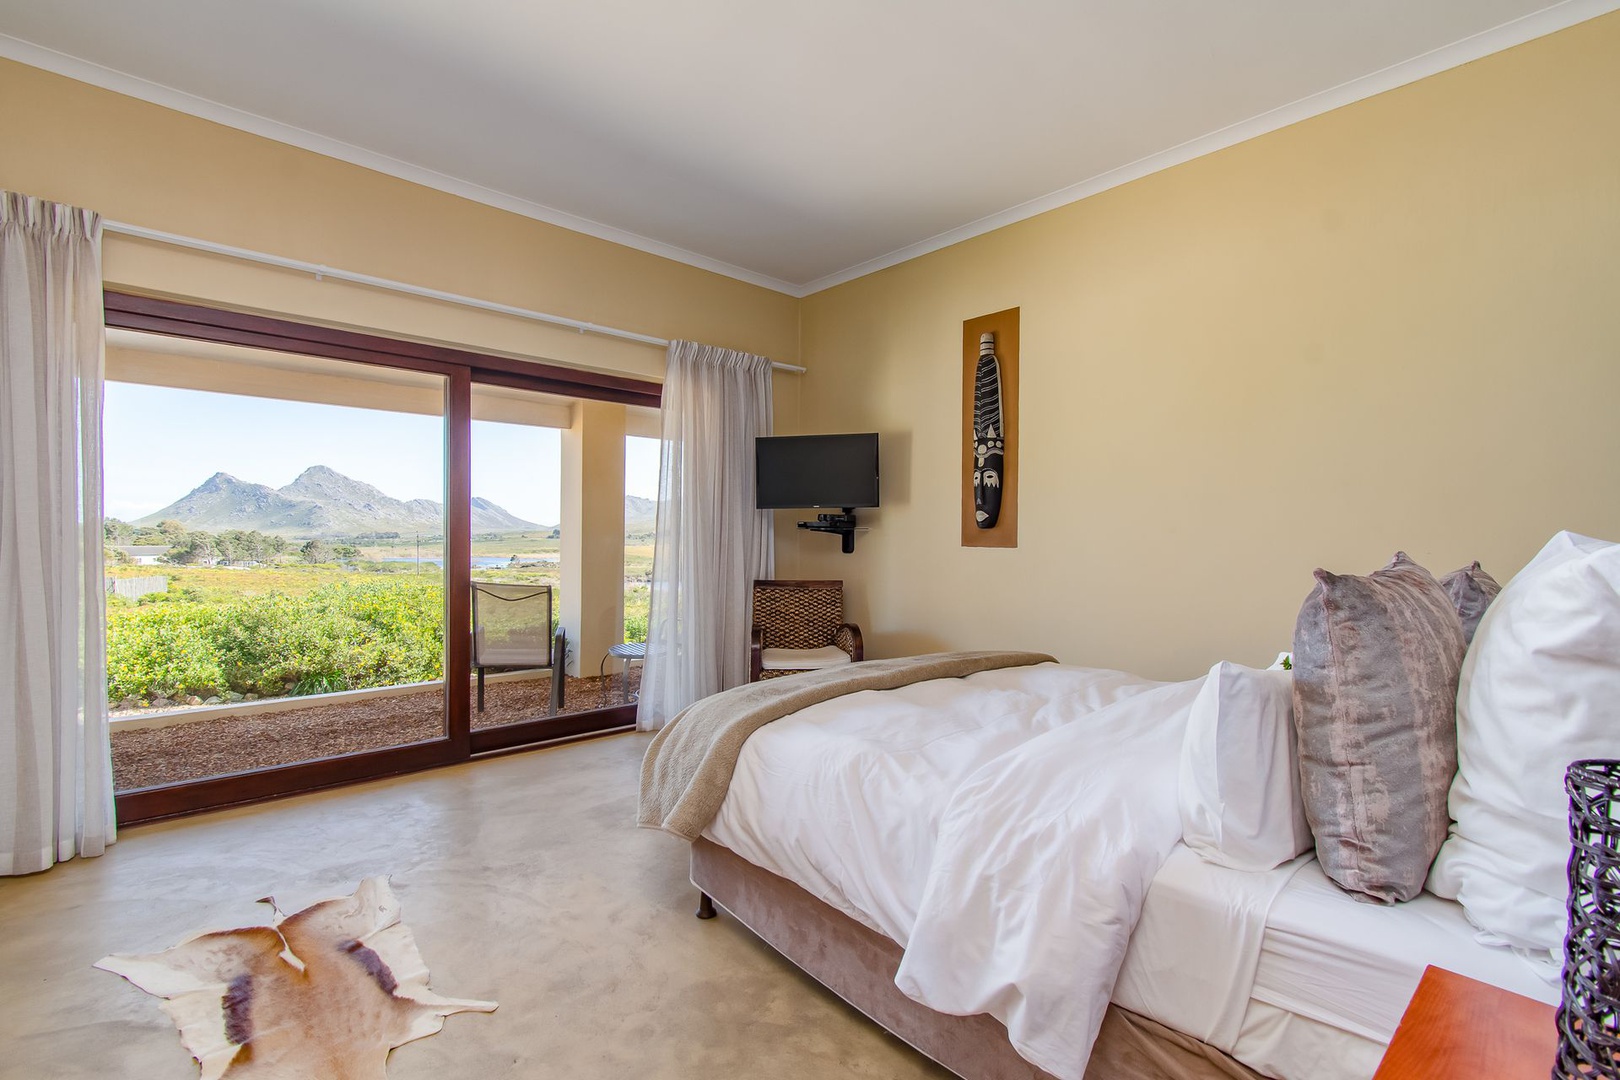 House in Pringle Bay Rural - Queensized bedroom facing the direction of Pringle Bay